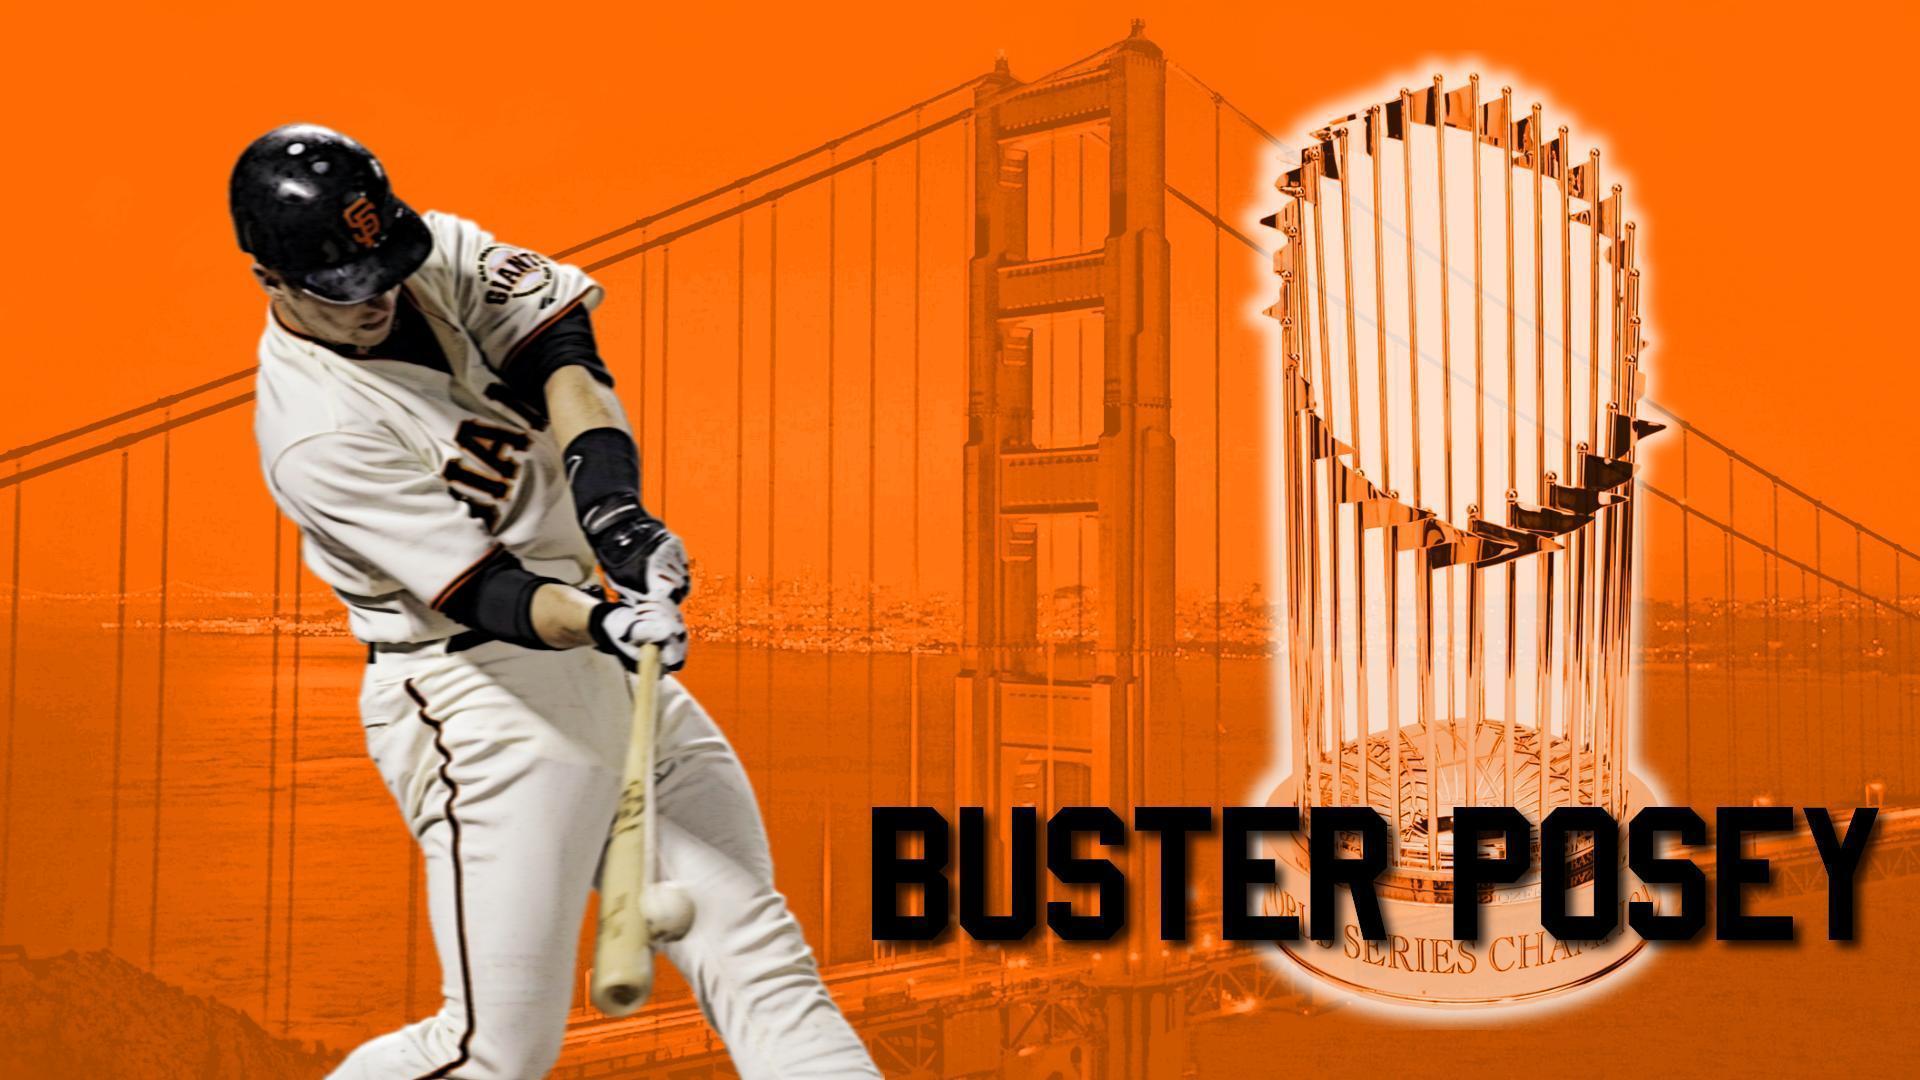 Buster Posey Picture 6 1080p